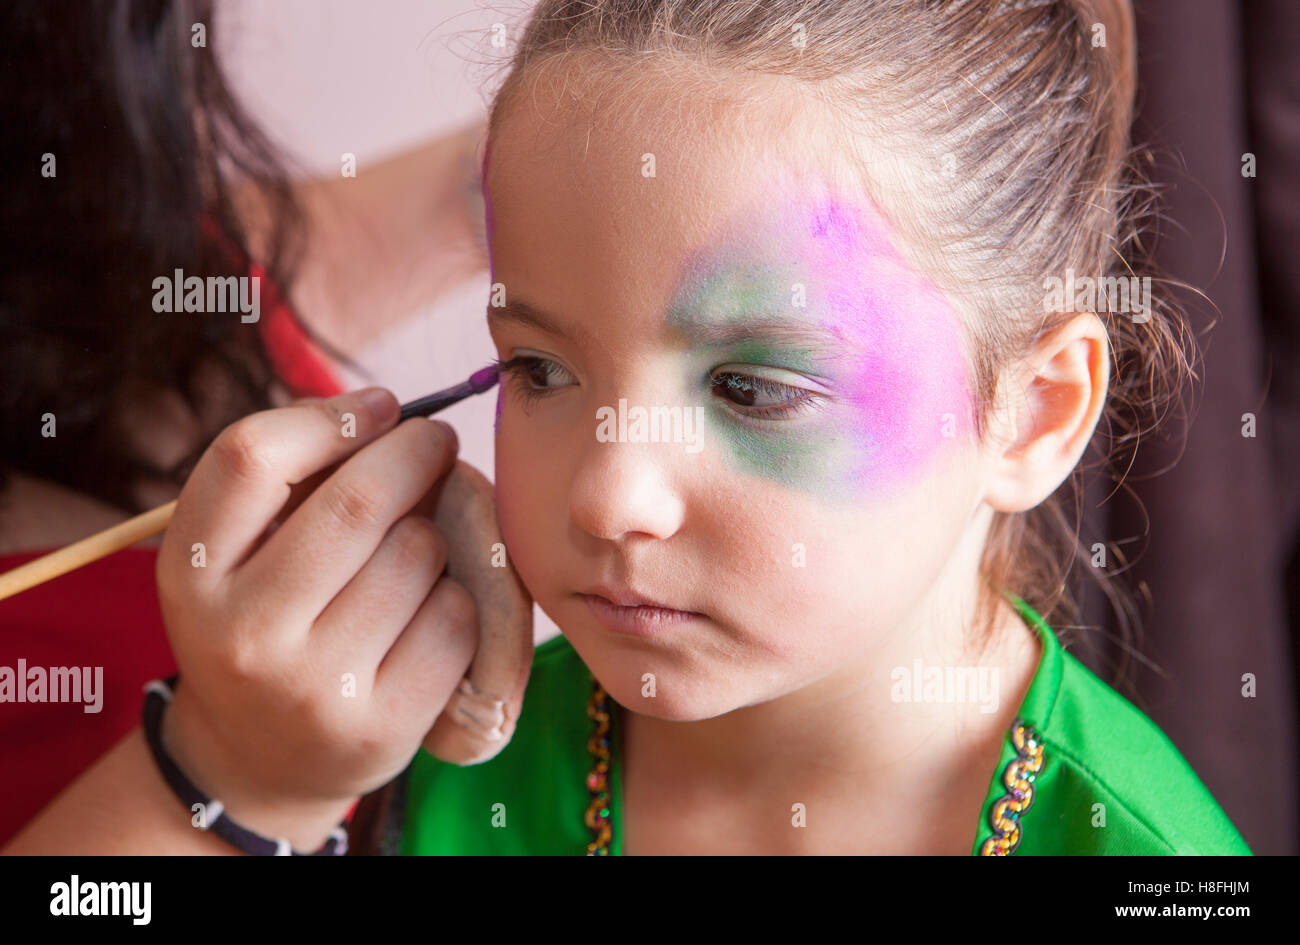 Ashaninka girl with red face paint Stock Photo - Alamy